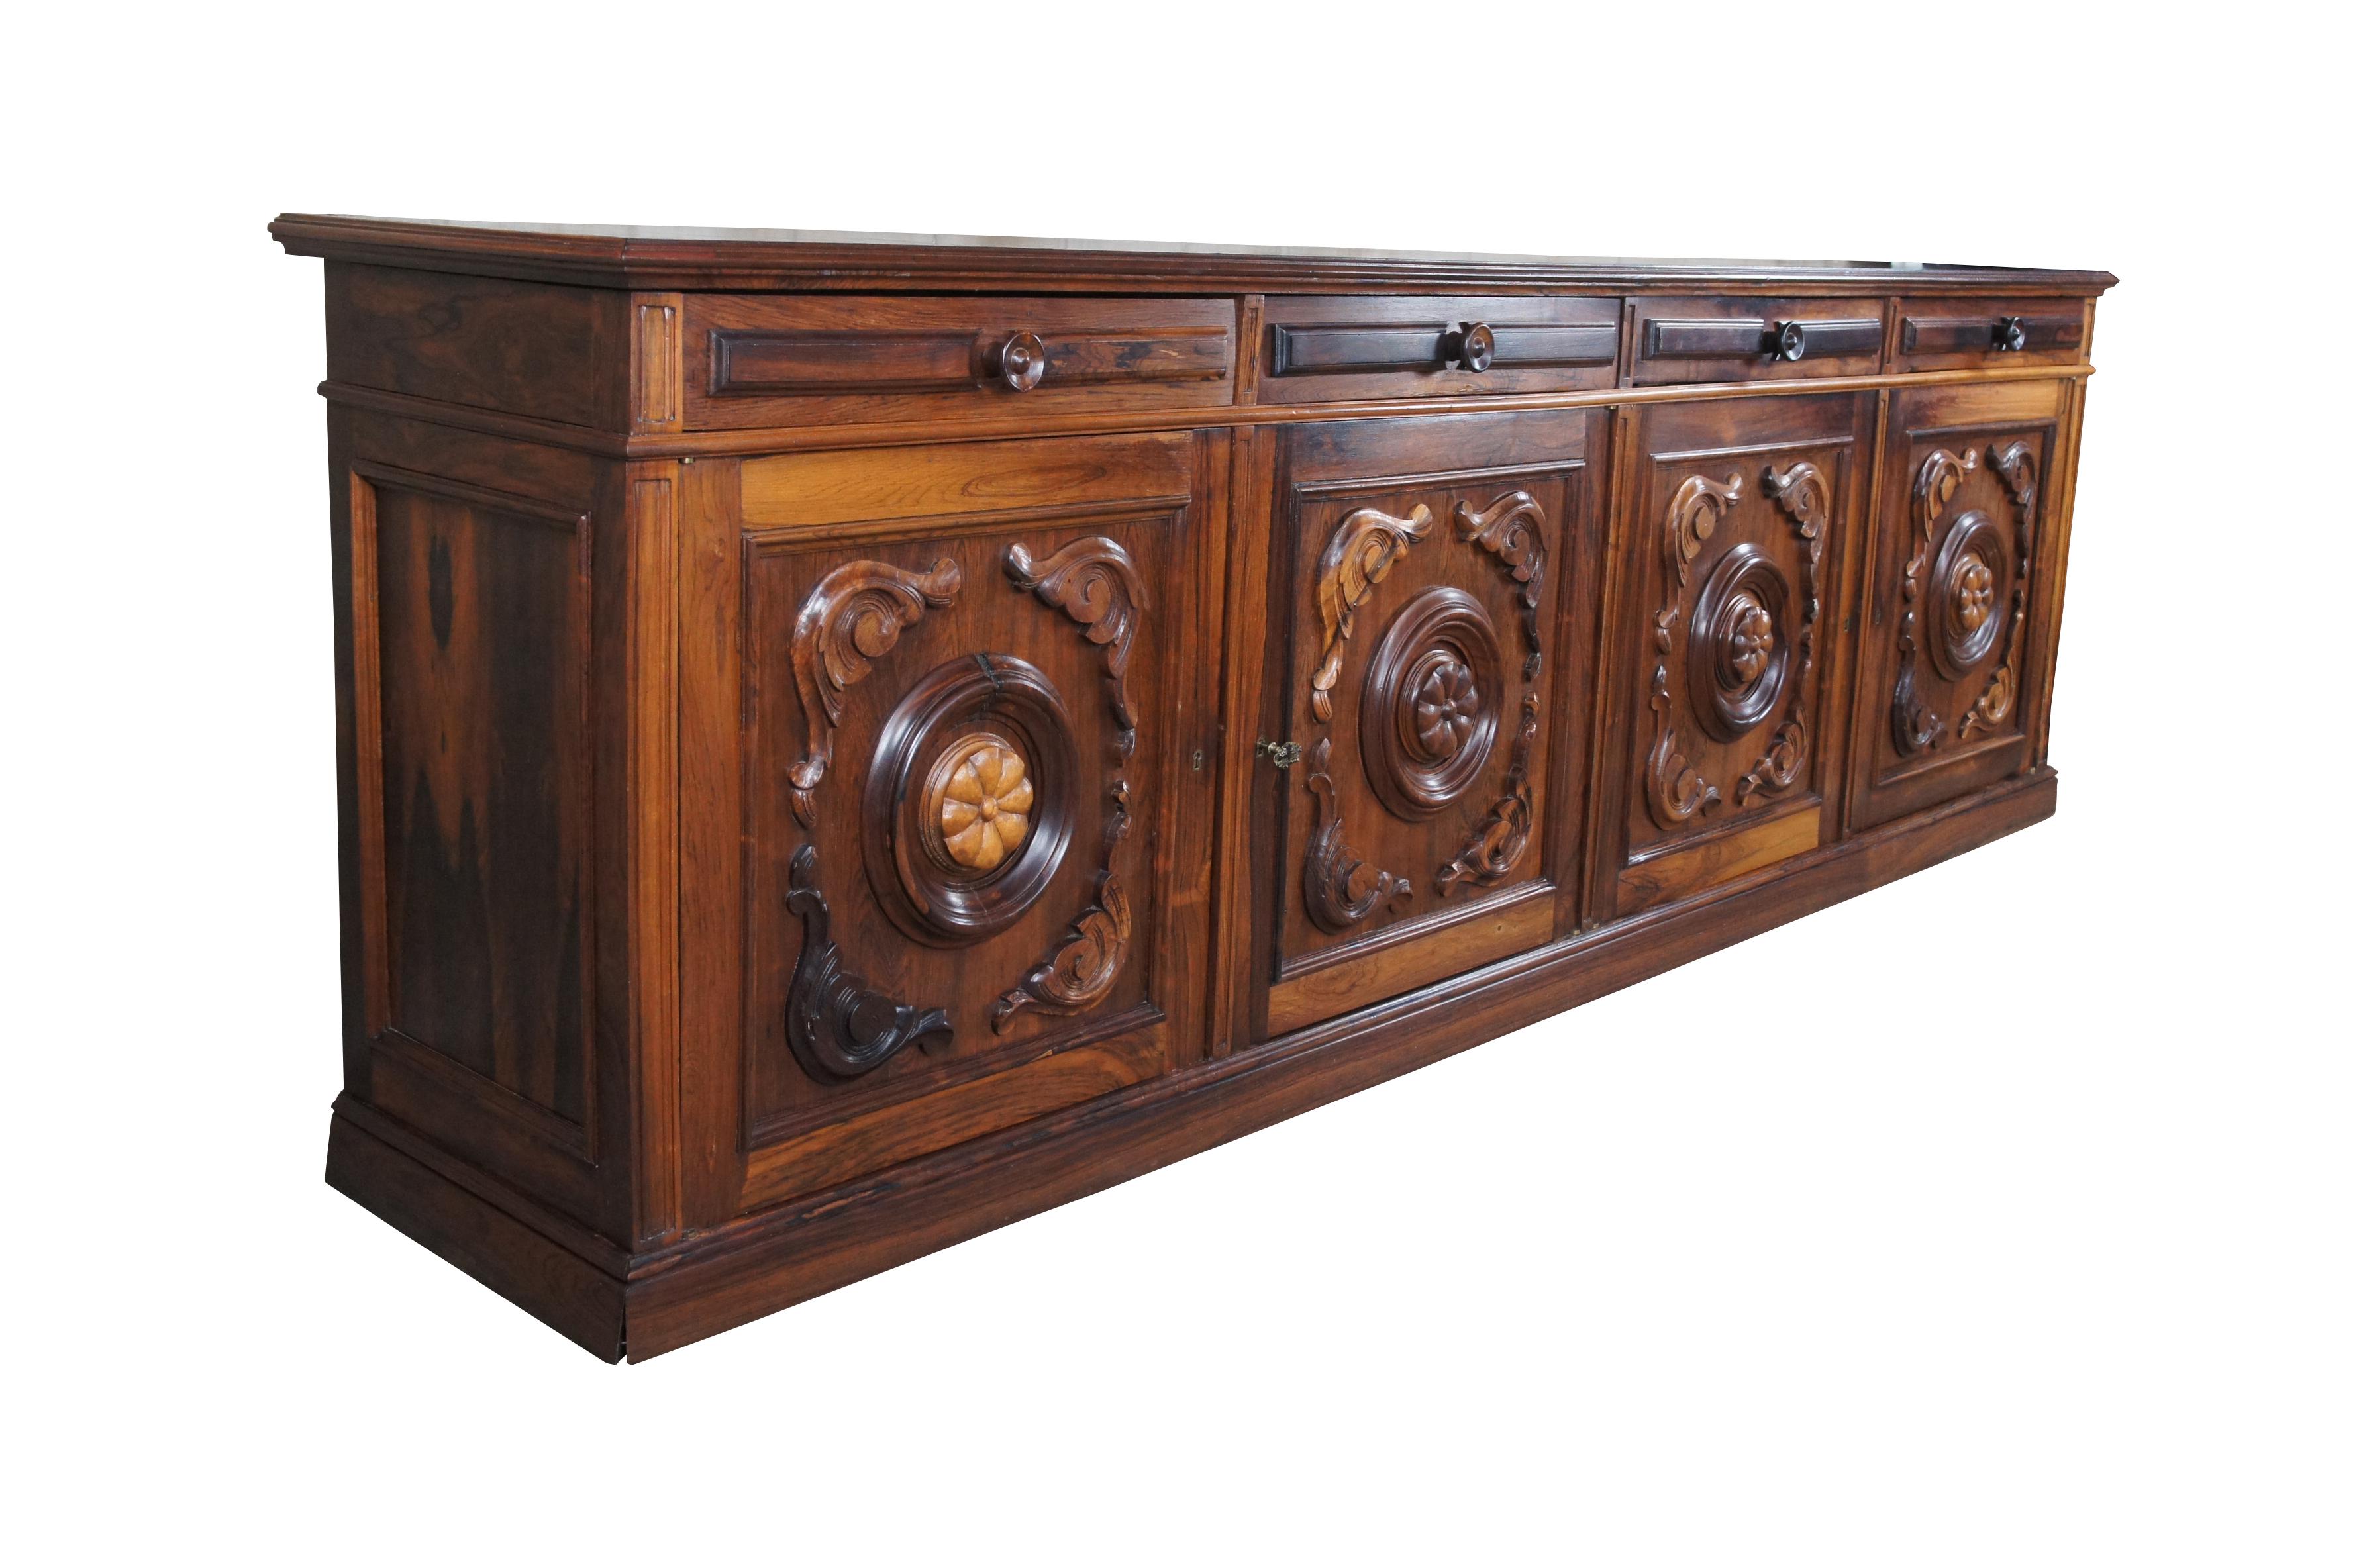 Midcentury Brazilian Rosewood French Provincial Sideboard Console Credenza In Good Condition For Sale In Dayton, OH